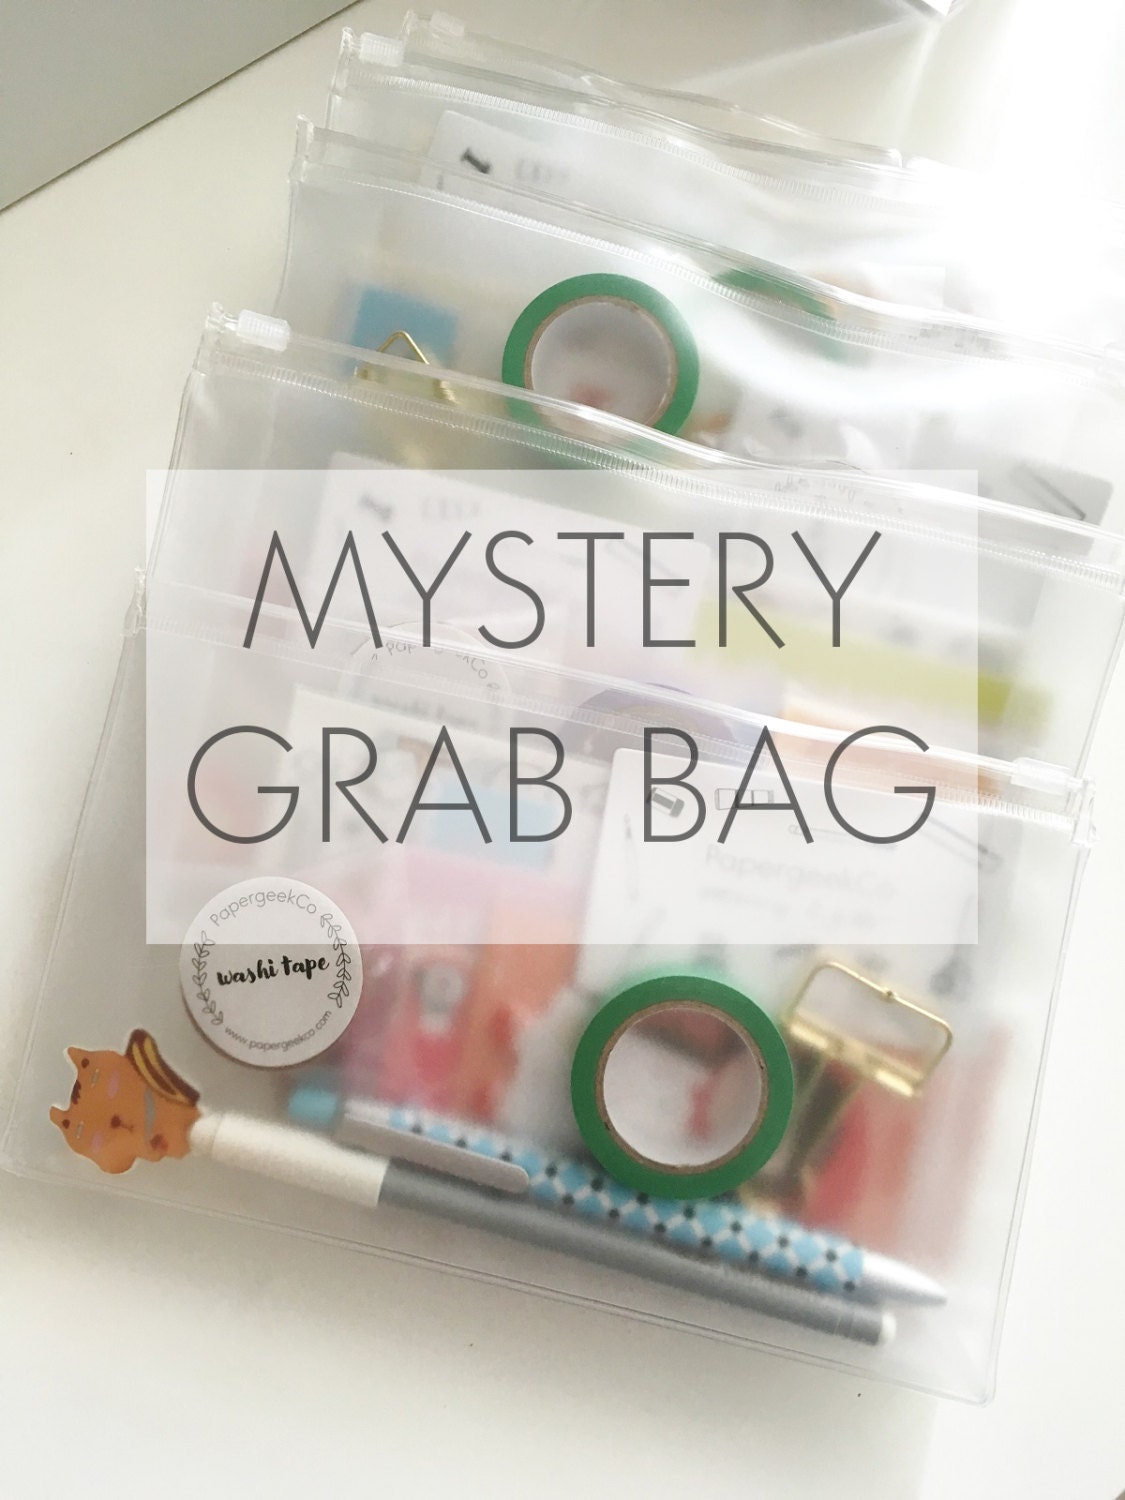 Mystery Grab Bag from PapergeekCo on Etsy Studio